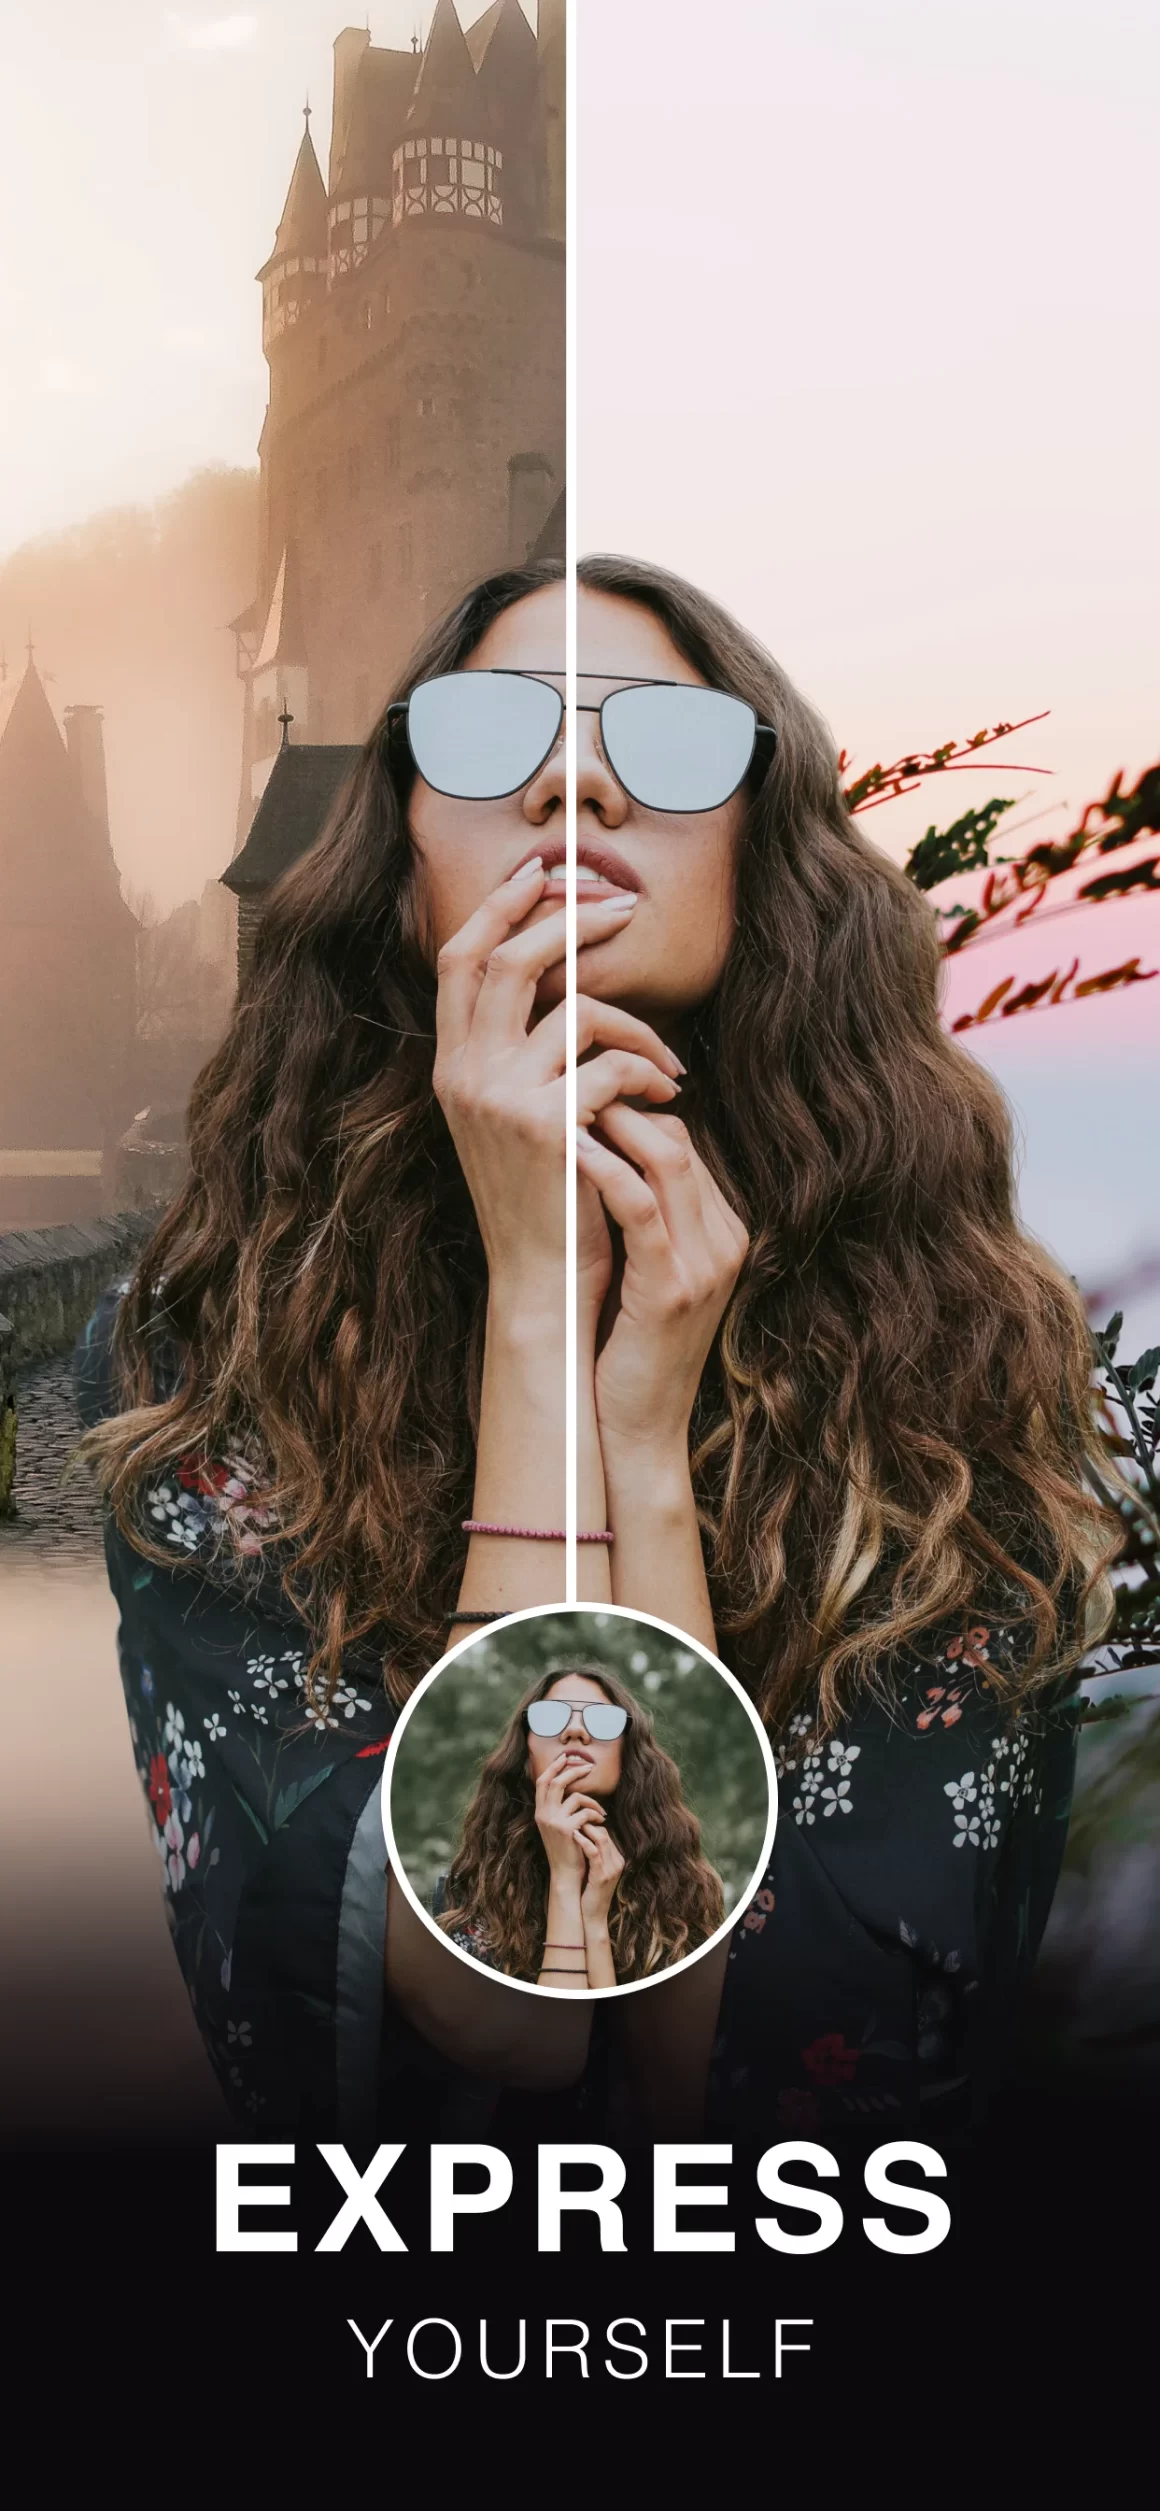 unnamed 15 8 1160x2511 - Photo Lab Mod Apk V3.13.2 (Without Watermark) Unlocked